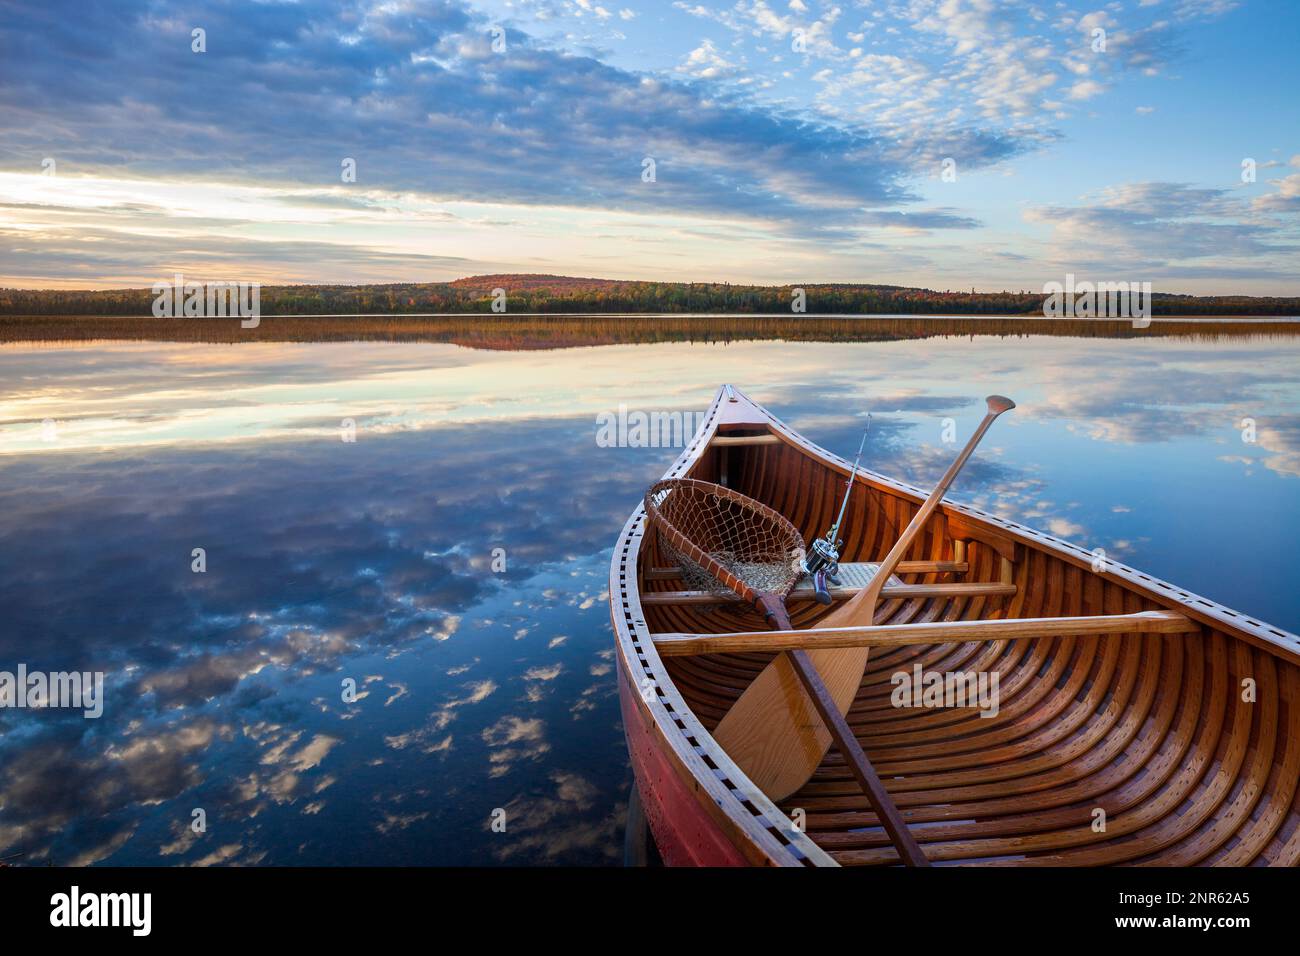 Wood canoe with vintage fishing rod and net on calm lake with hills with trees in autumn color in northern Minnesota Stock Photo